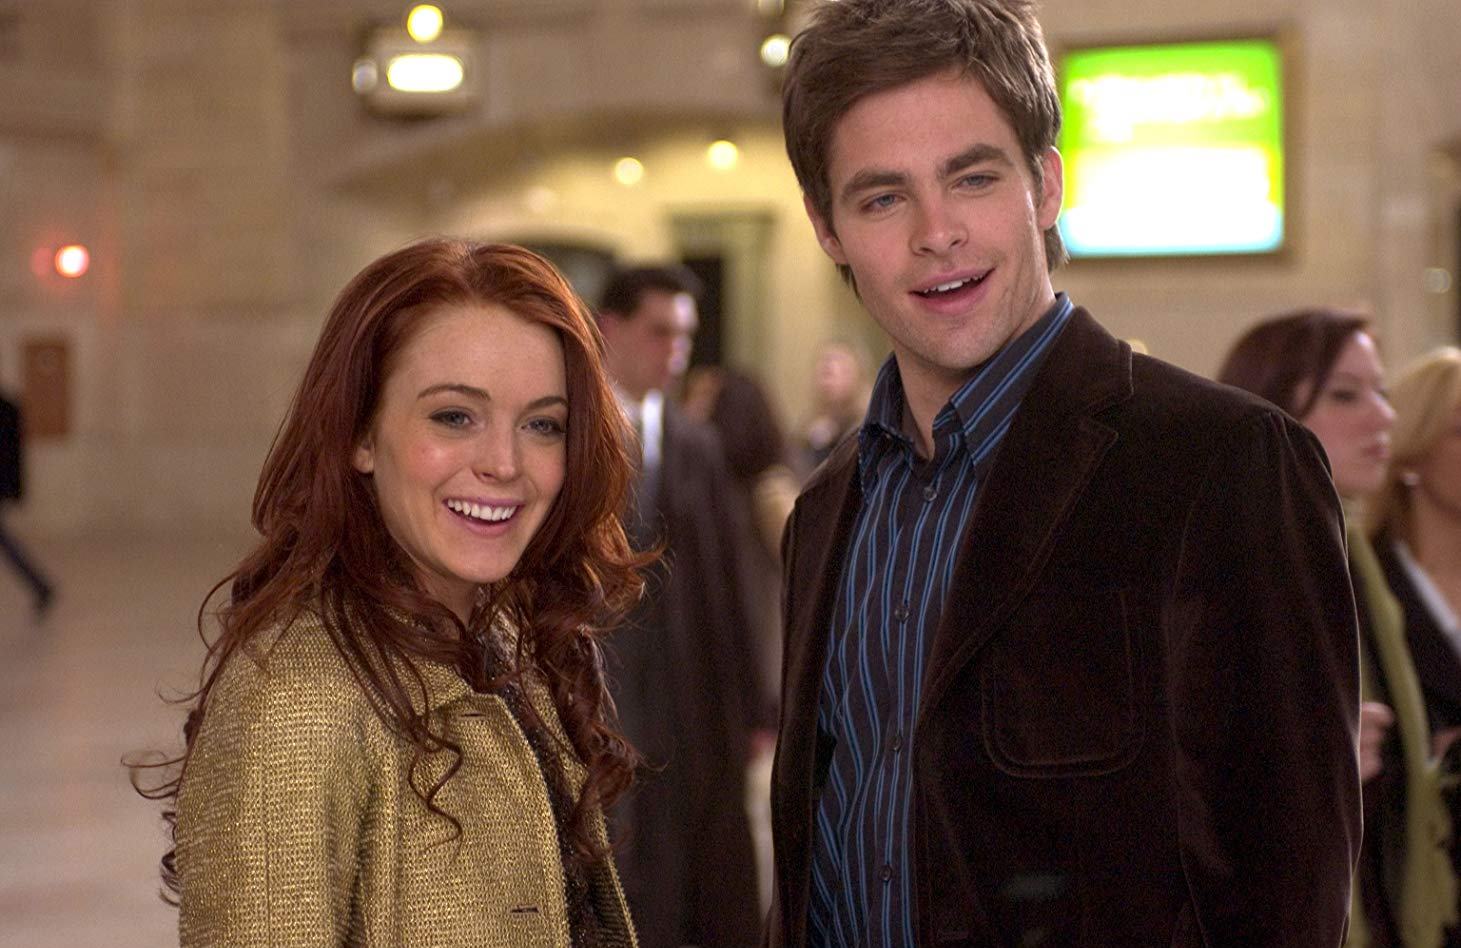 Lindsay Lohan and Chris Pine - respectively recipients of very good and very bad luck who end up swapping lucks after a kiss in Just My Luck (2006)